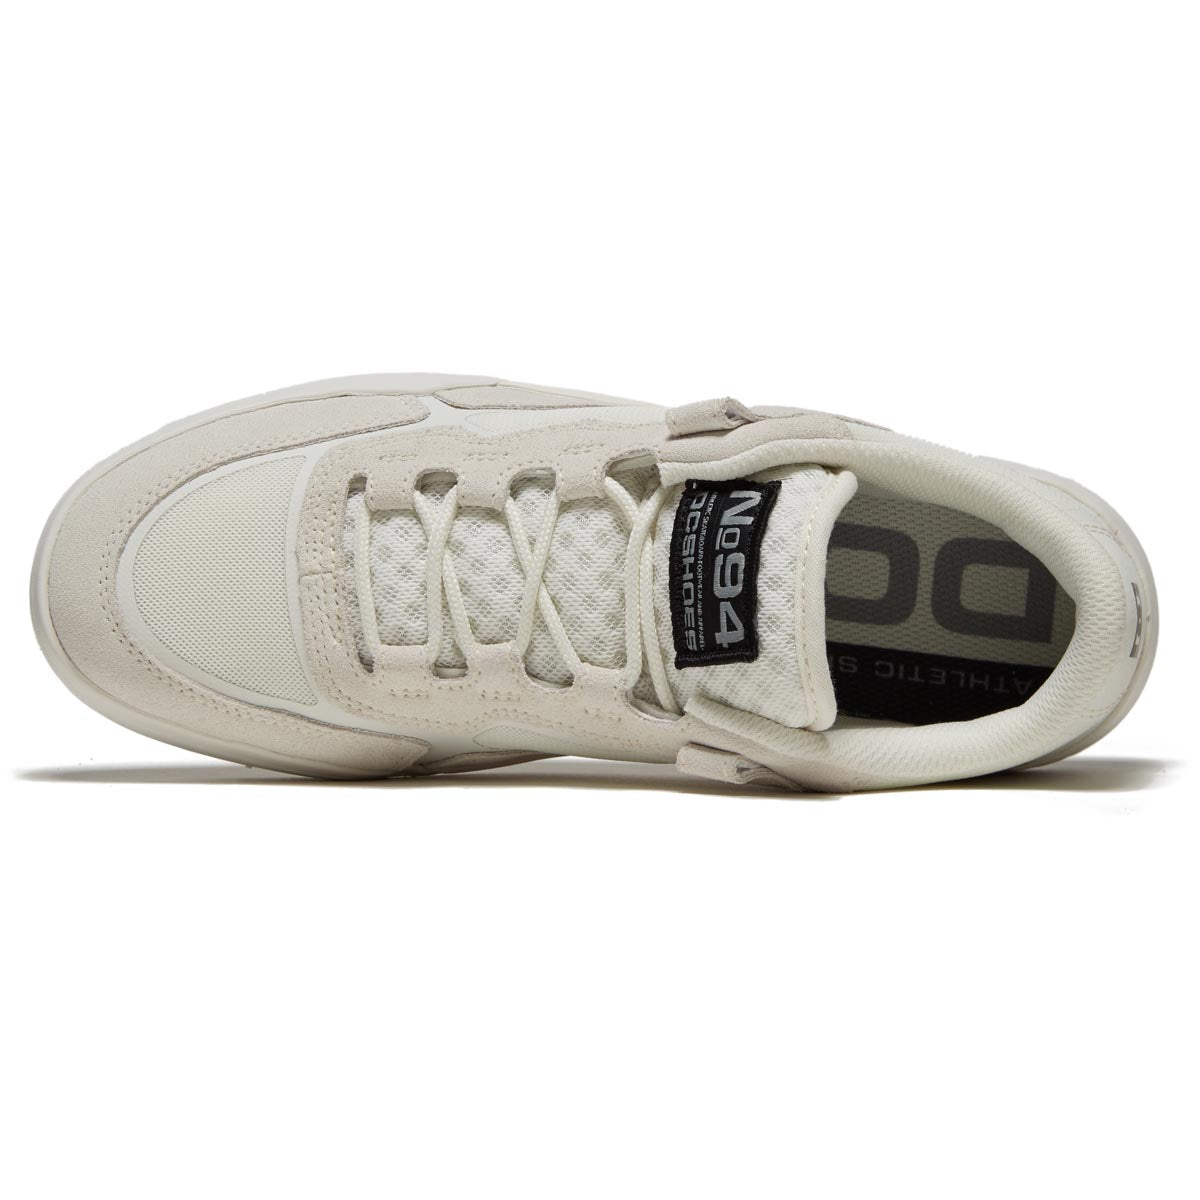 DC Metric Shoes - Off White image 3